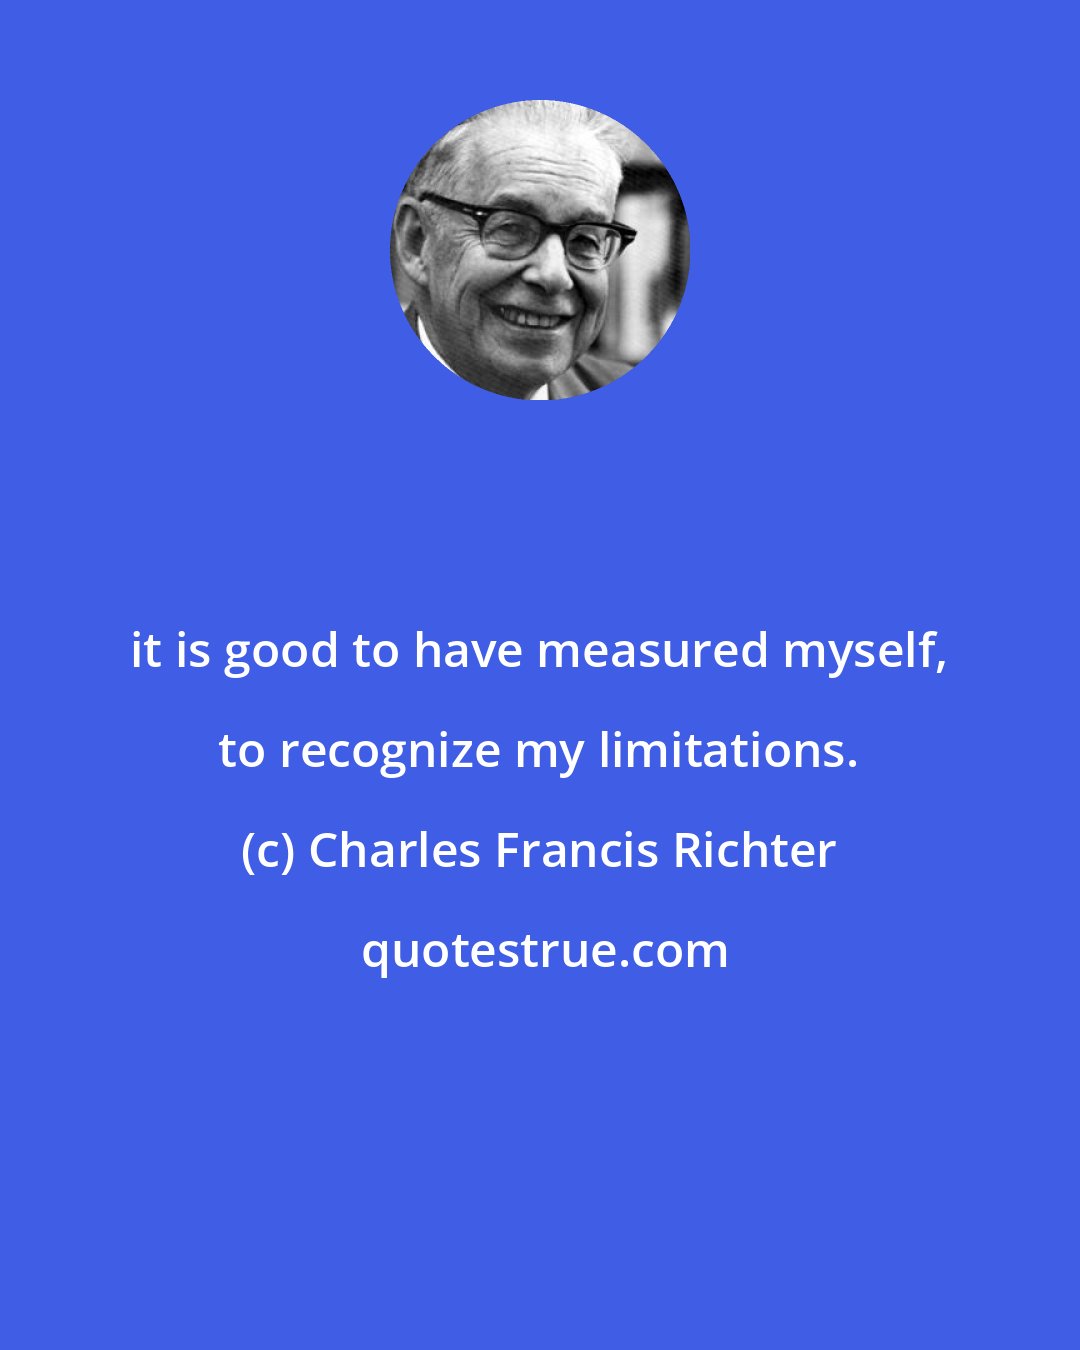 Charles Francis Richter: it is good to have measured myself, to recognize my limitations.